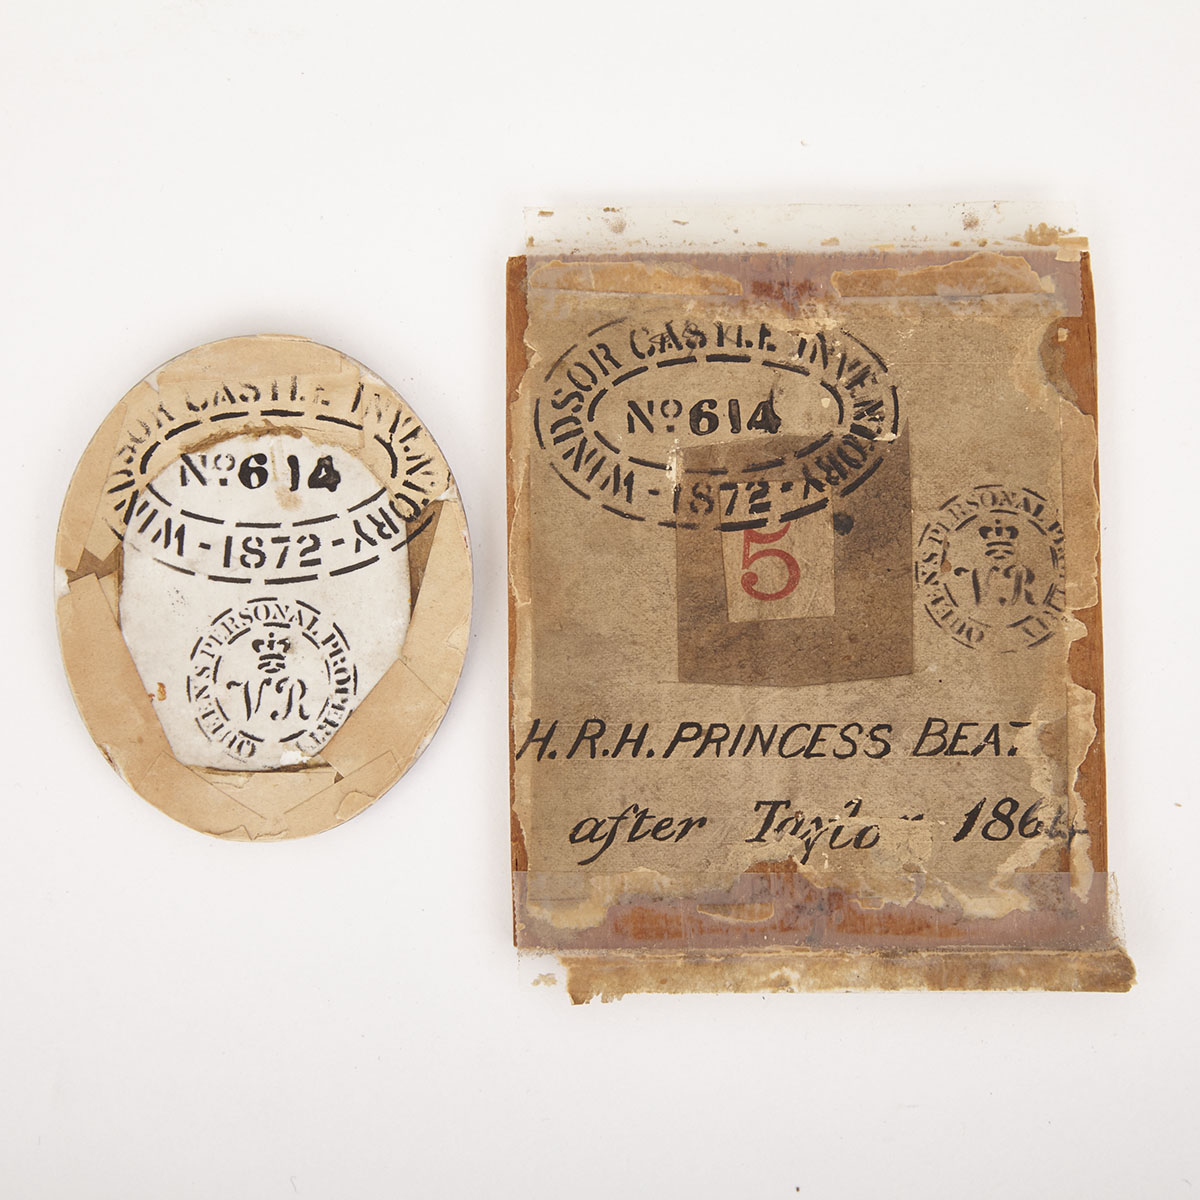 German Porcelain Oval Portrait Plaque of Princess Beatrice, after Edward Taylor, 1864, with Queen’s Personal Property and Windsor Castle Inventory Stamps, 1872